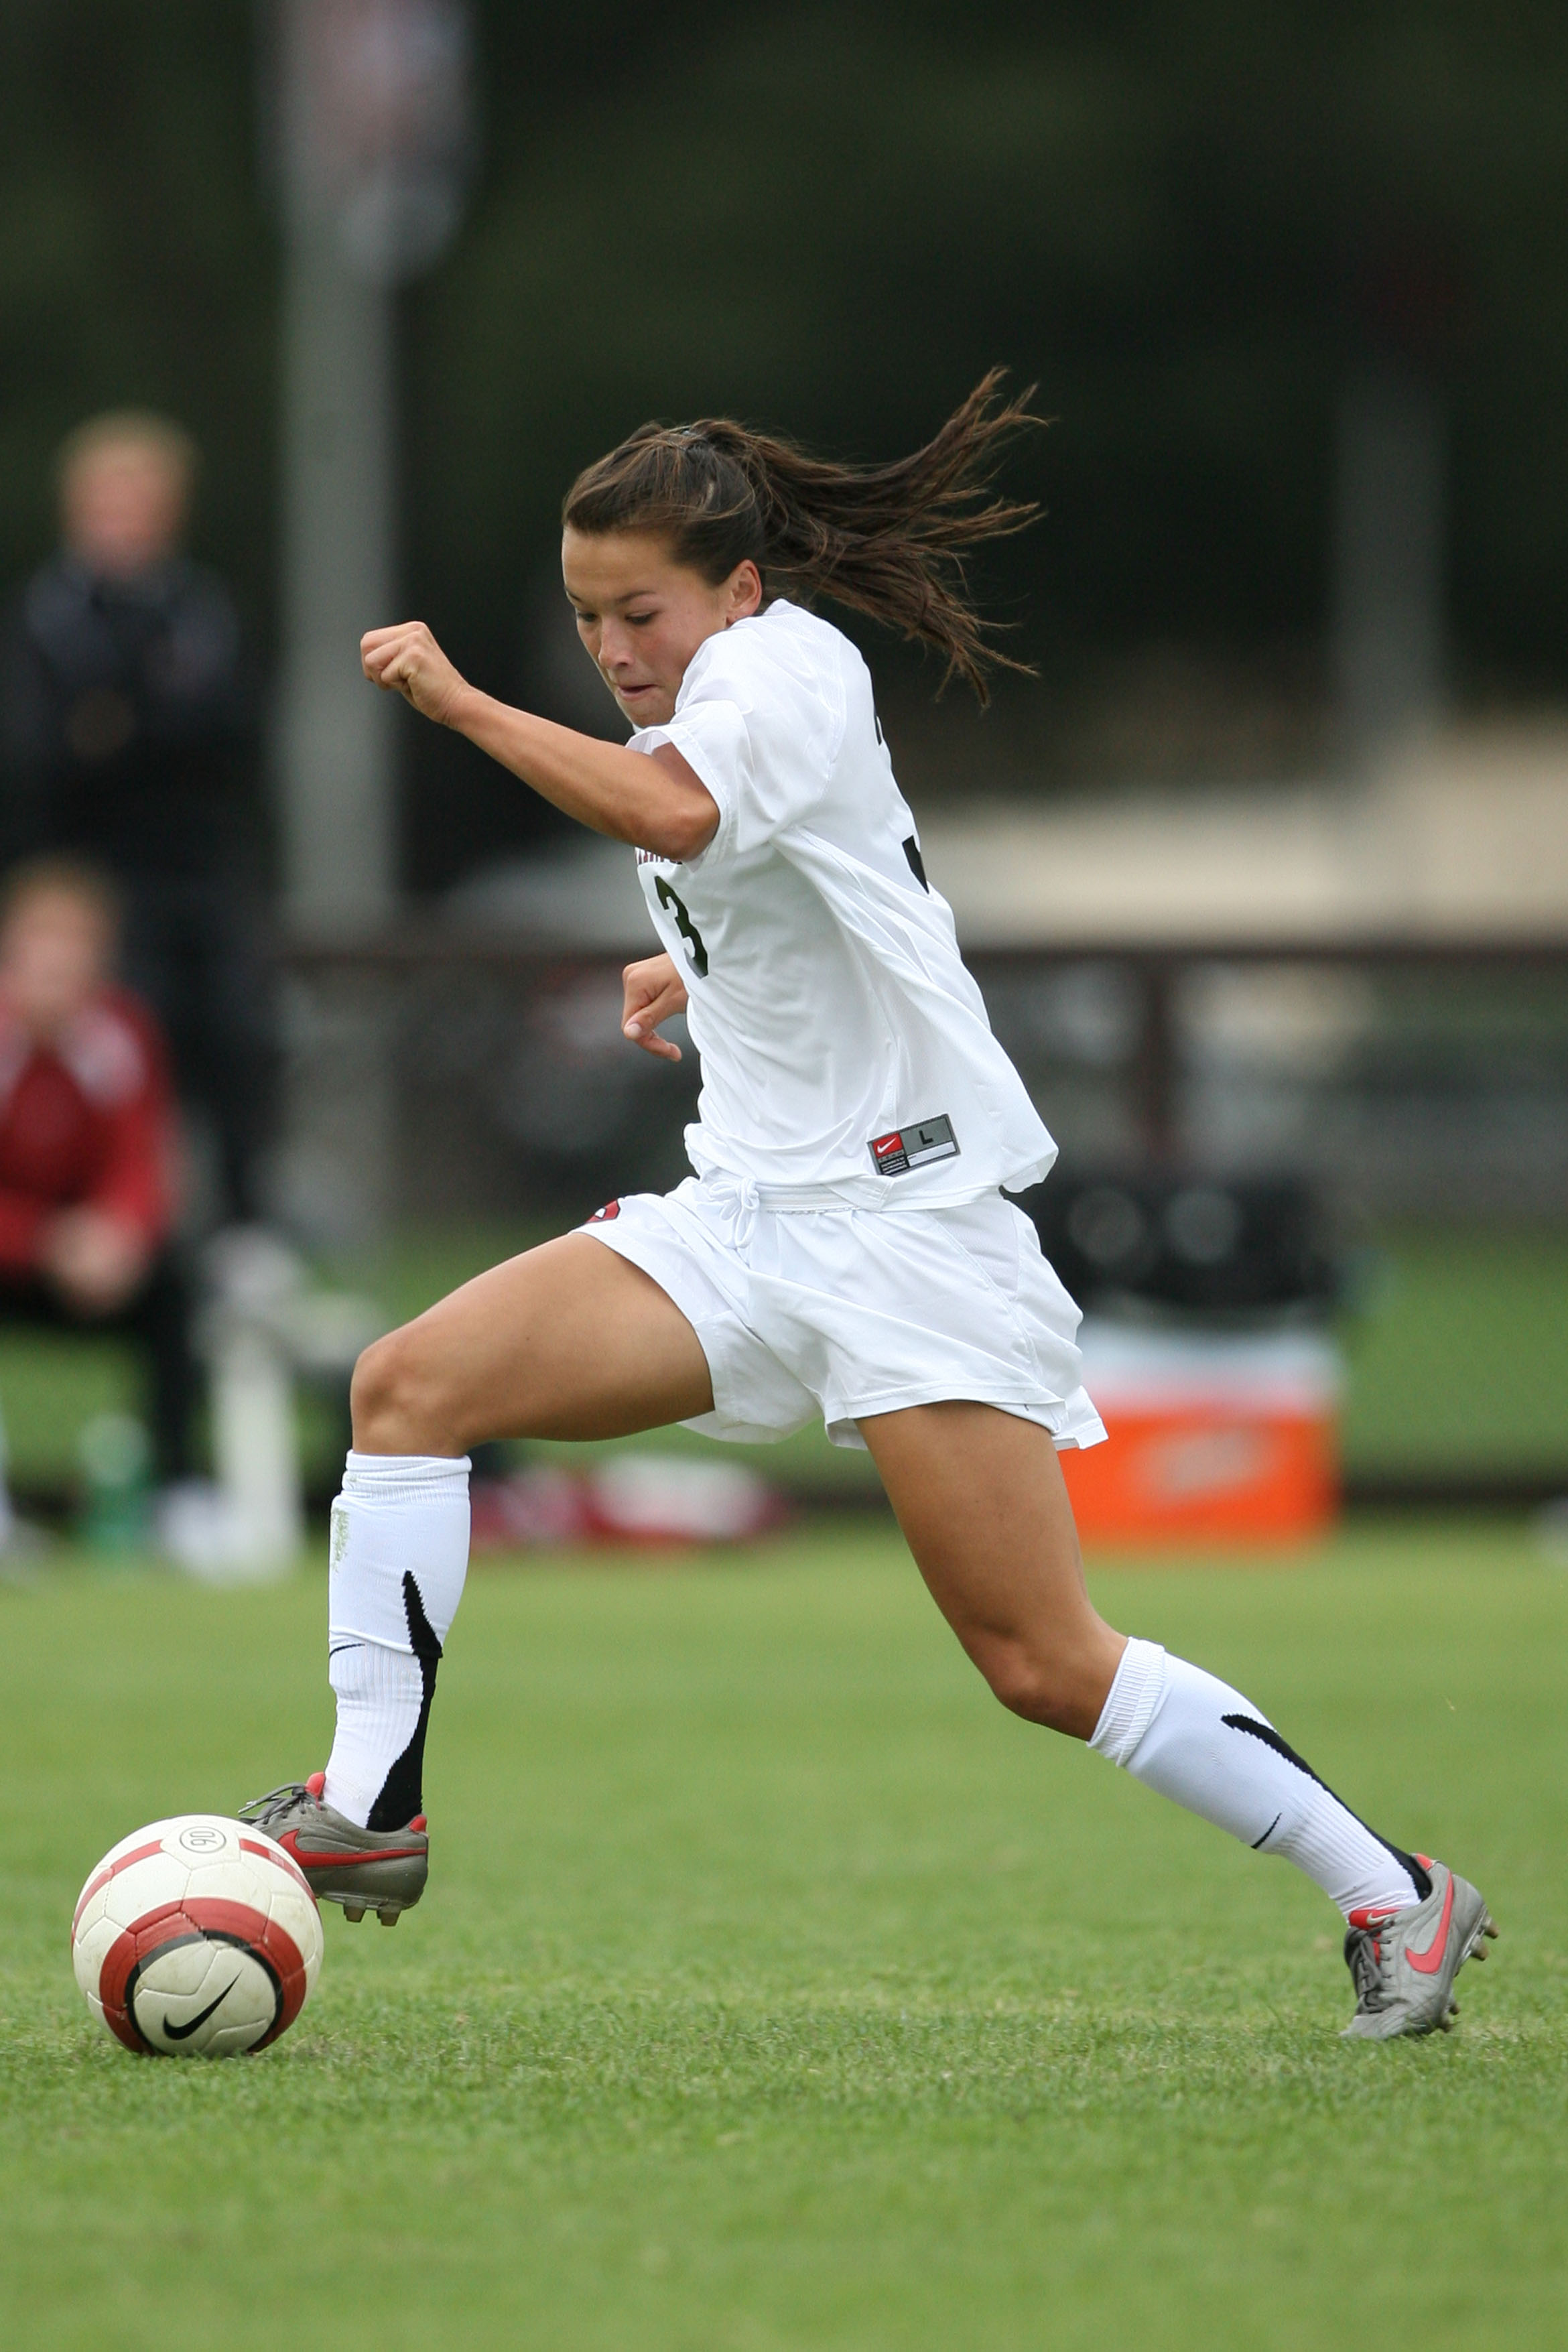 Ali Riley will play for the New Zealand women's soccer team at the Summer Olympics in Beijing in August. Photo: David Gonzales/Stanford Athletics